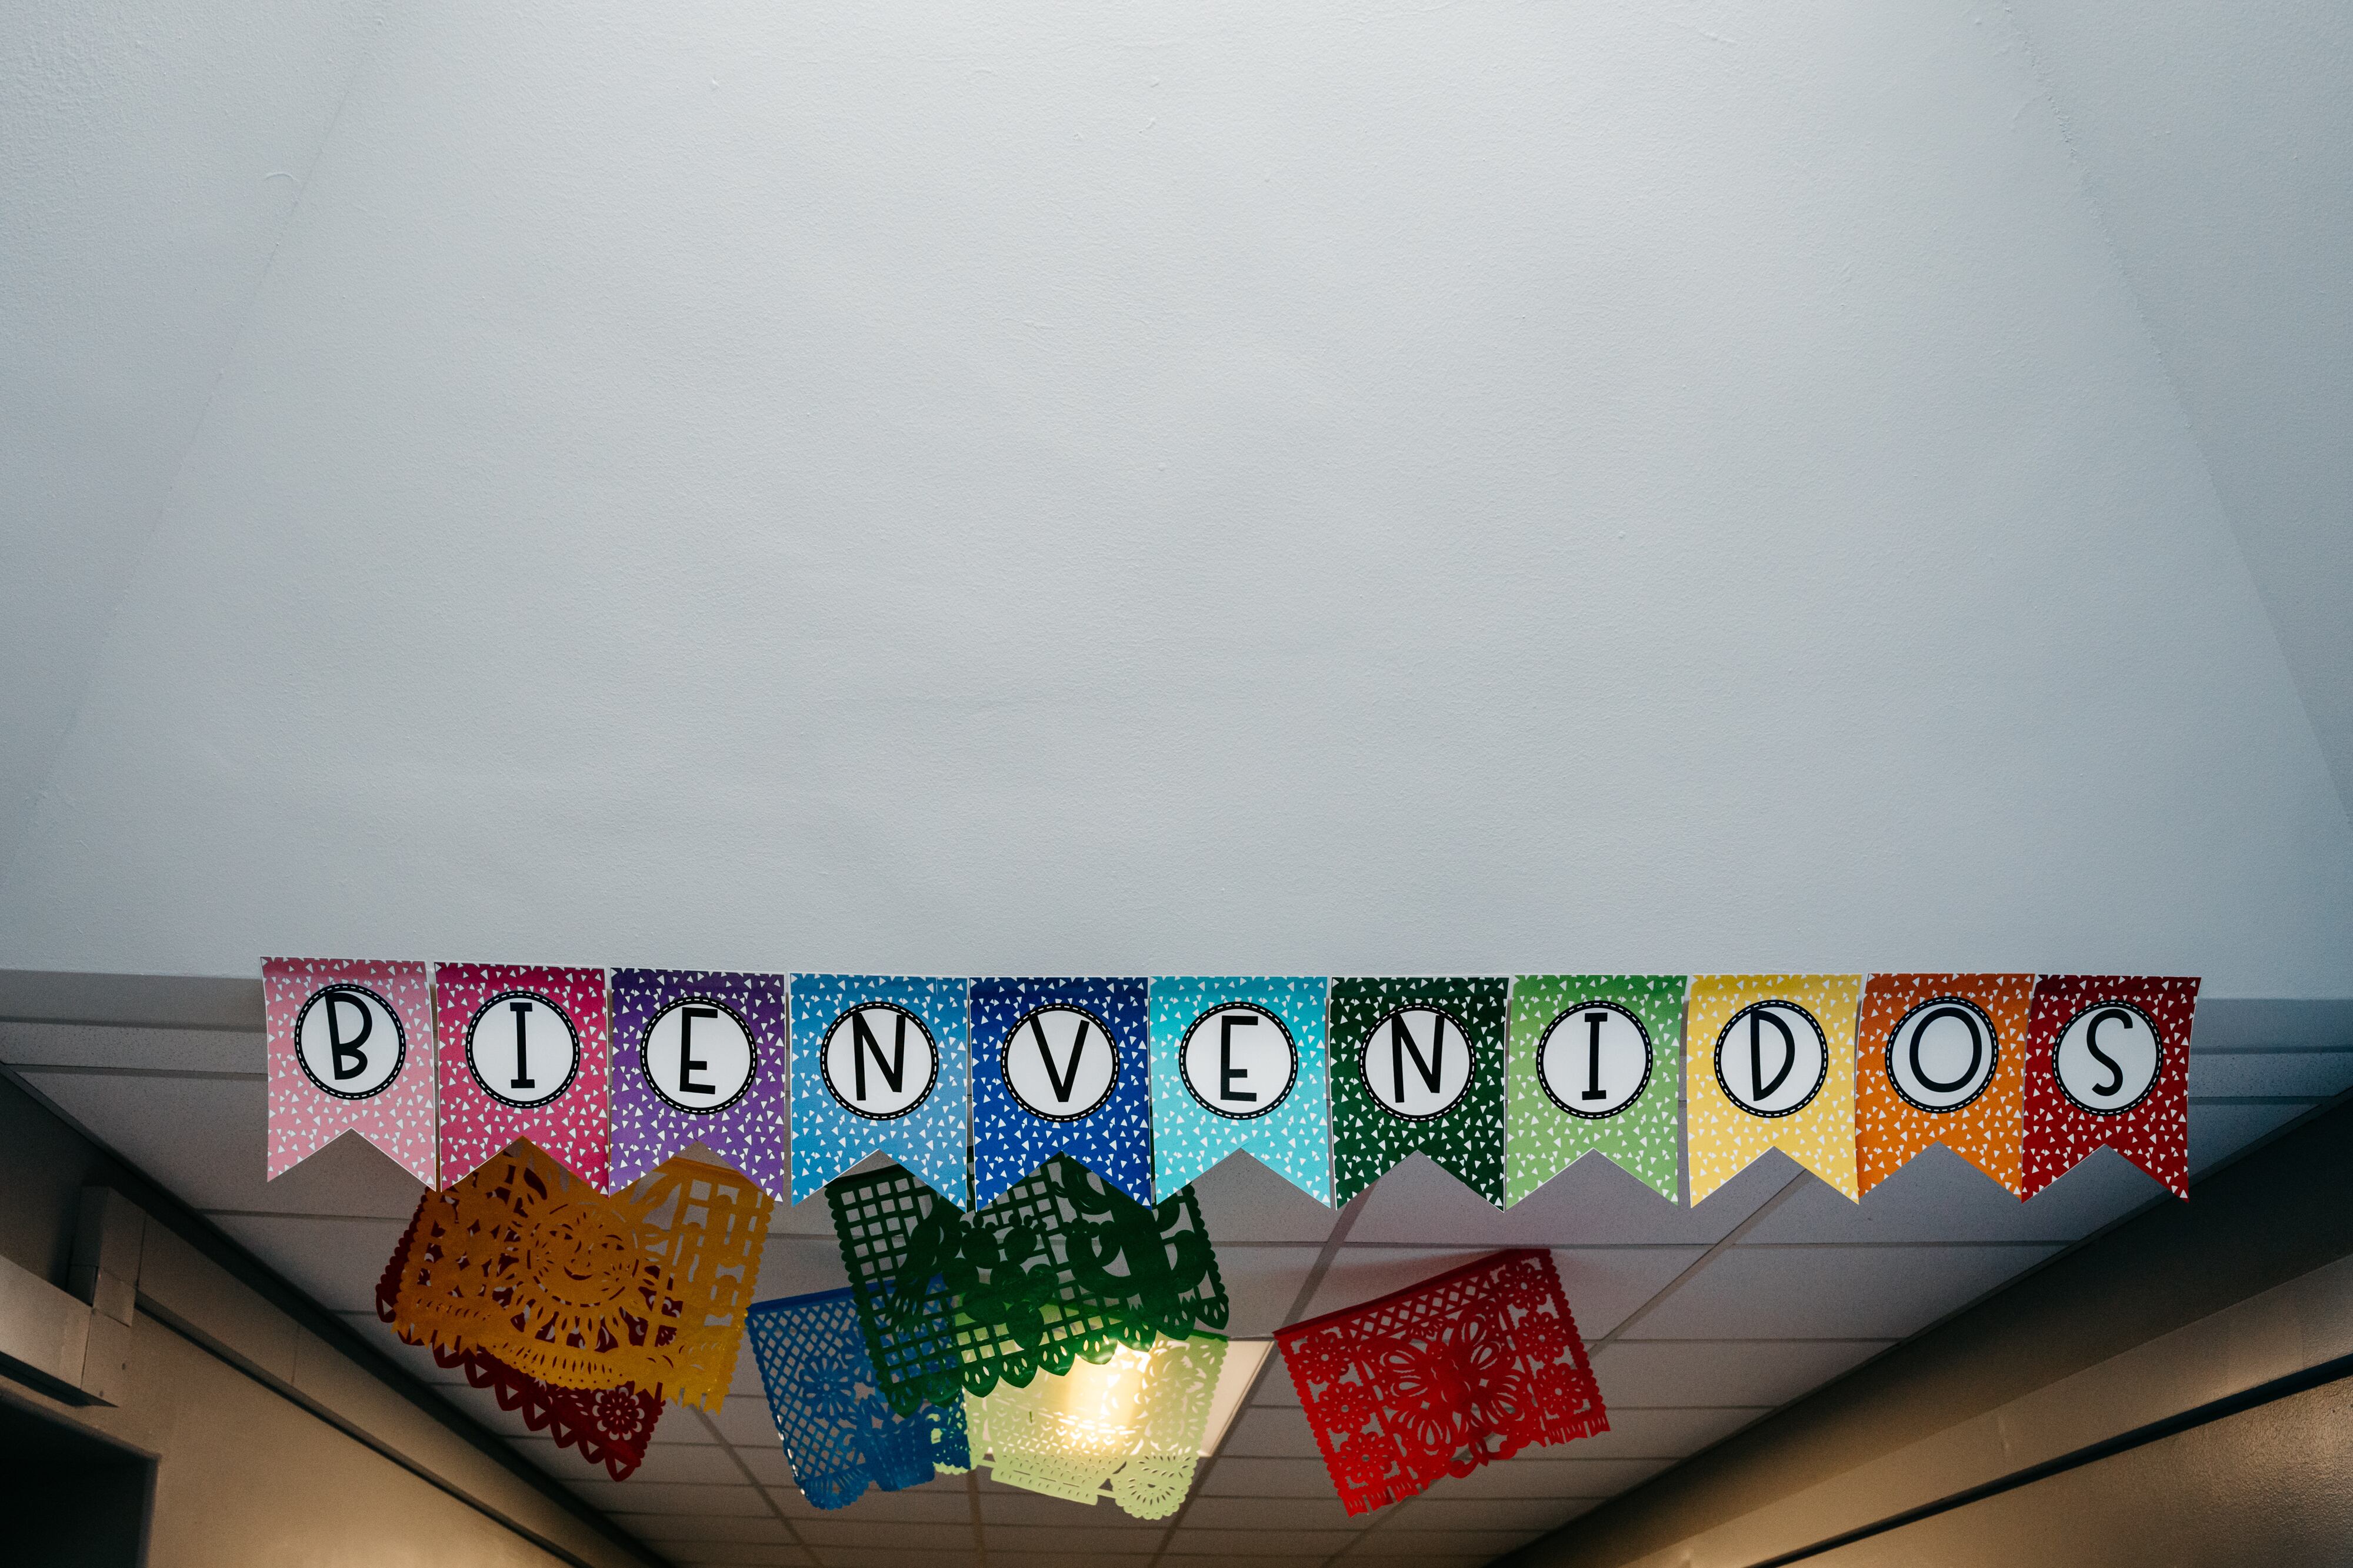 A colorful banner hanging from the ceiling that says "Bienvenidos," which is welcome in Spanish.